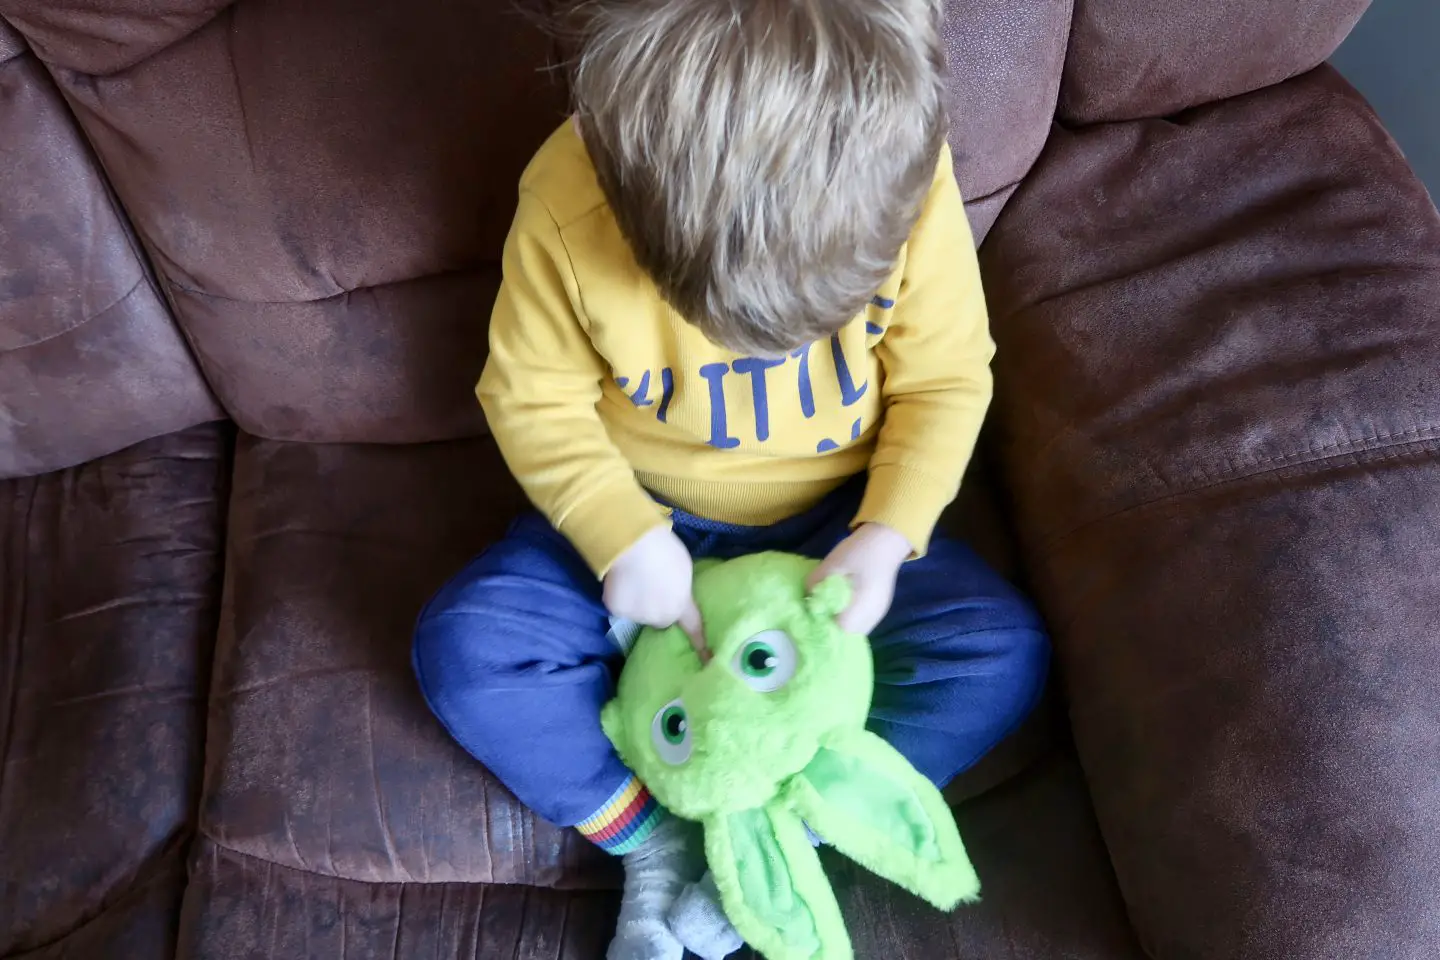 A little boy touching the mouth of a Sunny Bunnies toy